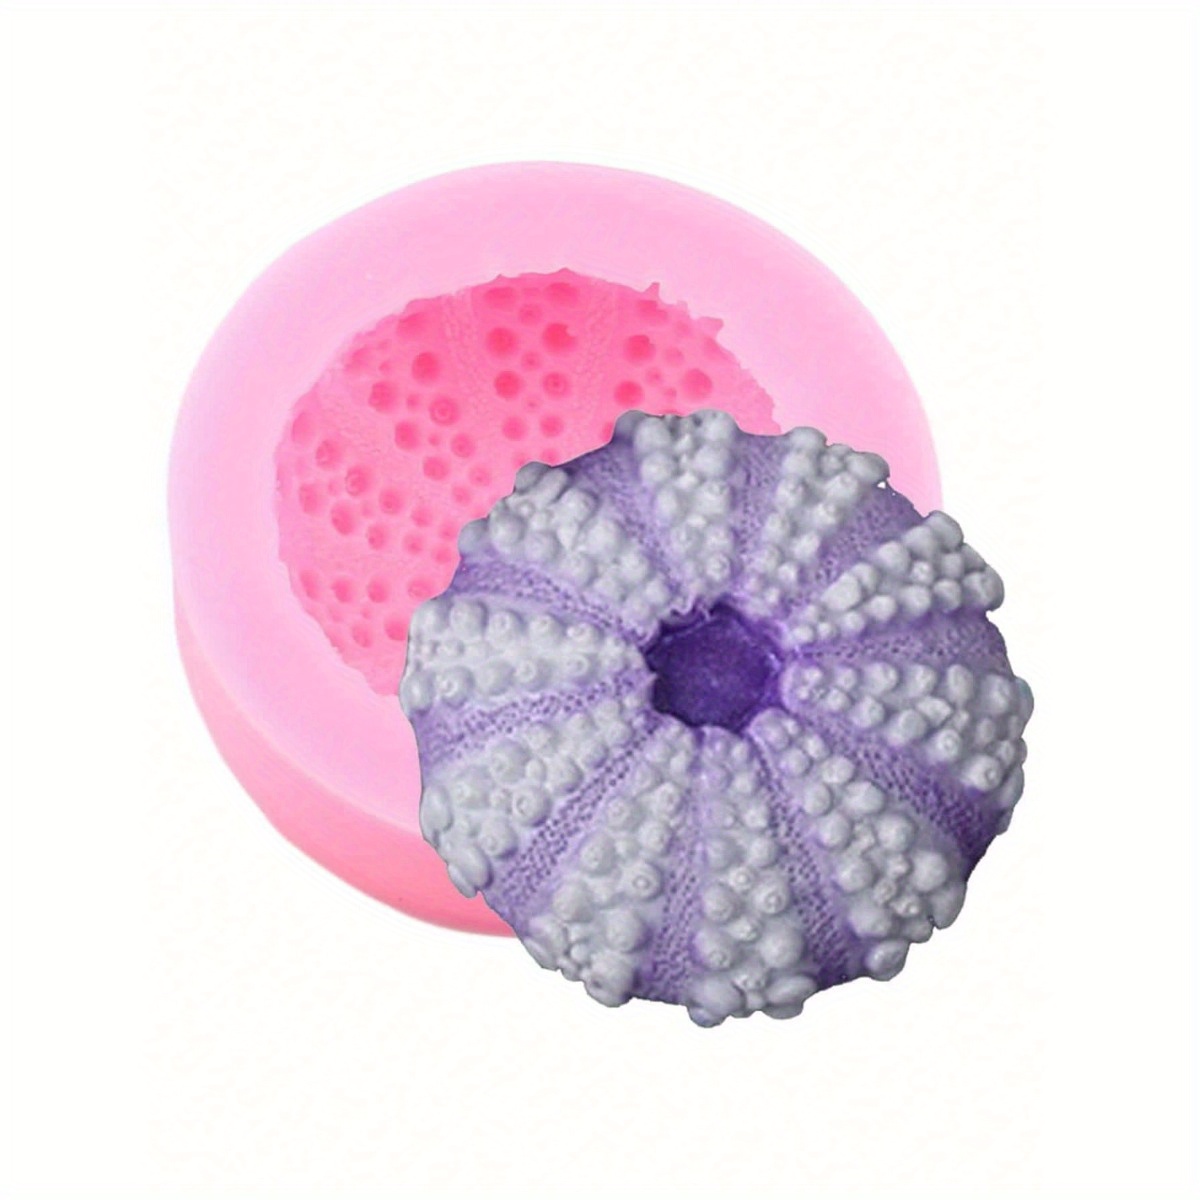 

1pc Sea Urchin Silicone Mold Resin Clay Soap Mould Fondant Cake Decorating Tools Chocolate Gumpaste Candy Moulds Diy Baking Molds